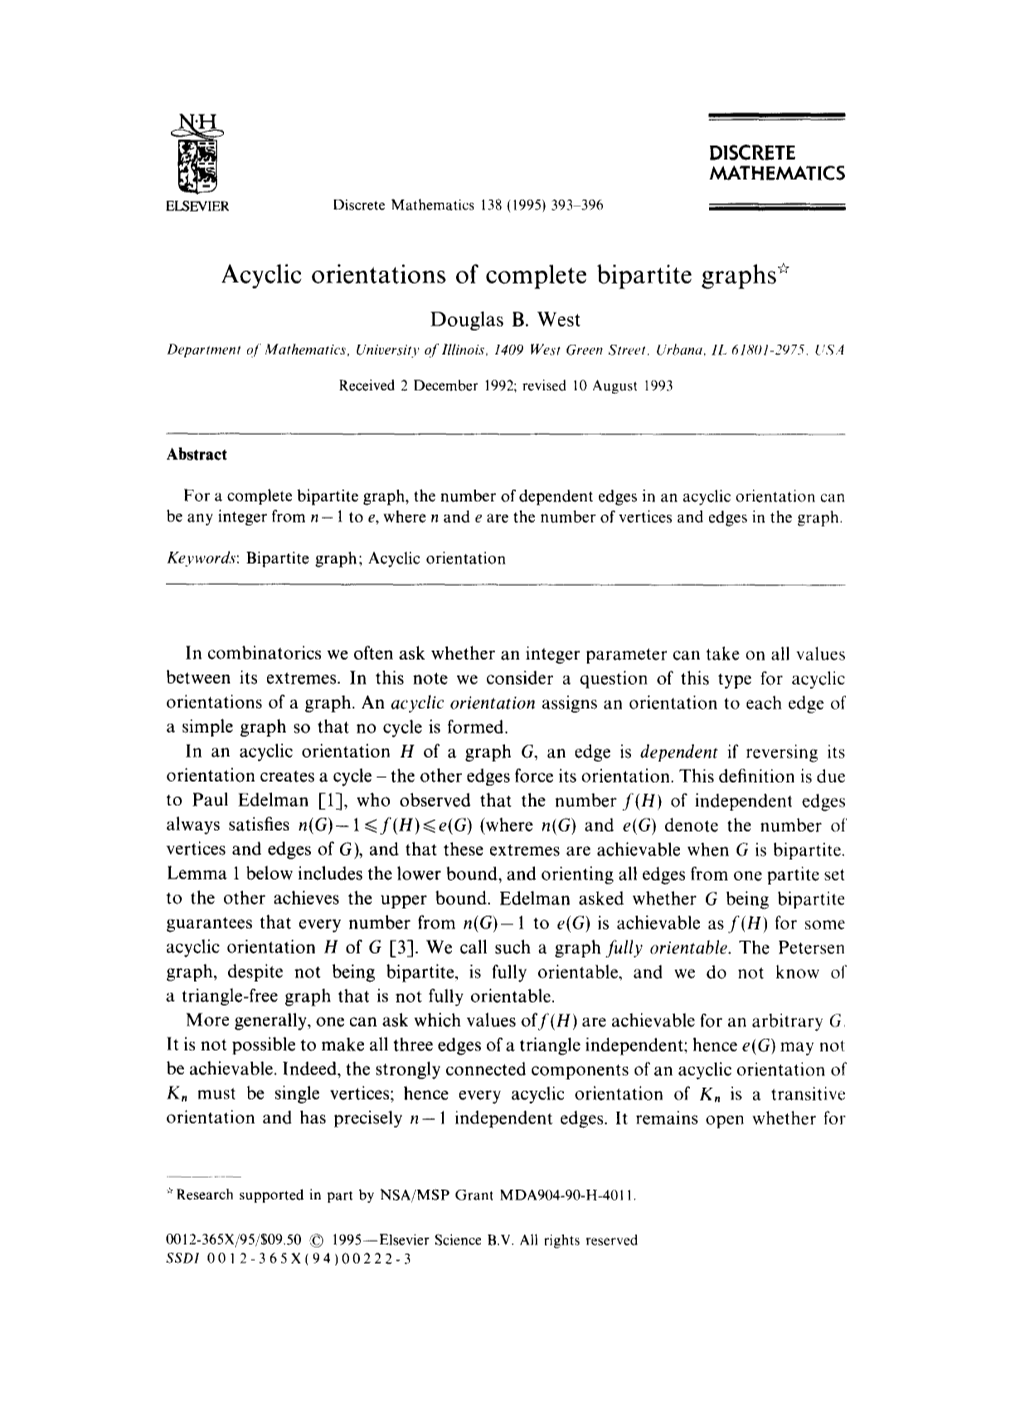 Acyclic Orientations of Complete Bipartite Graphs